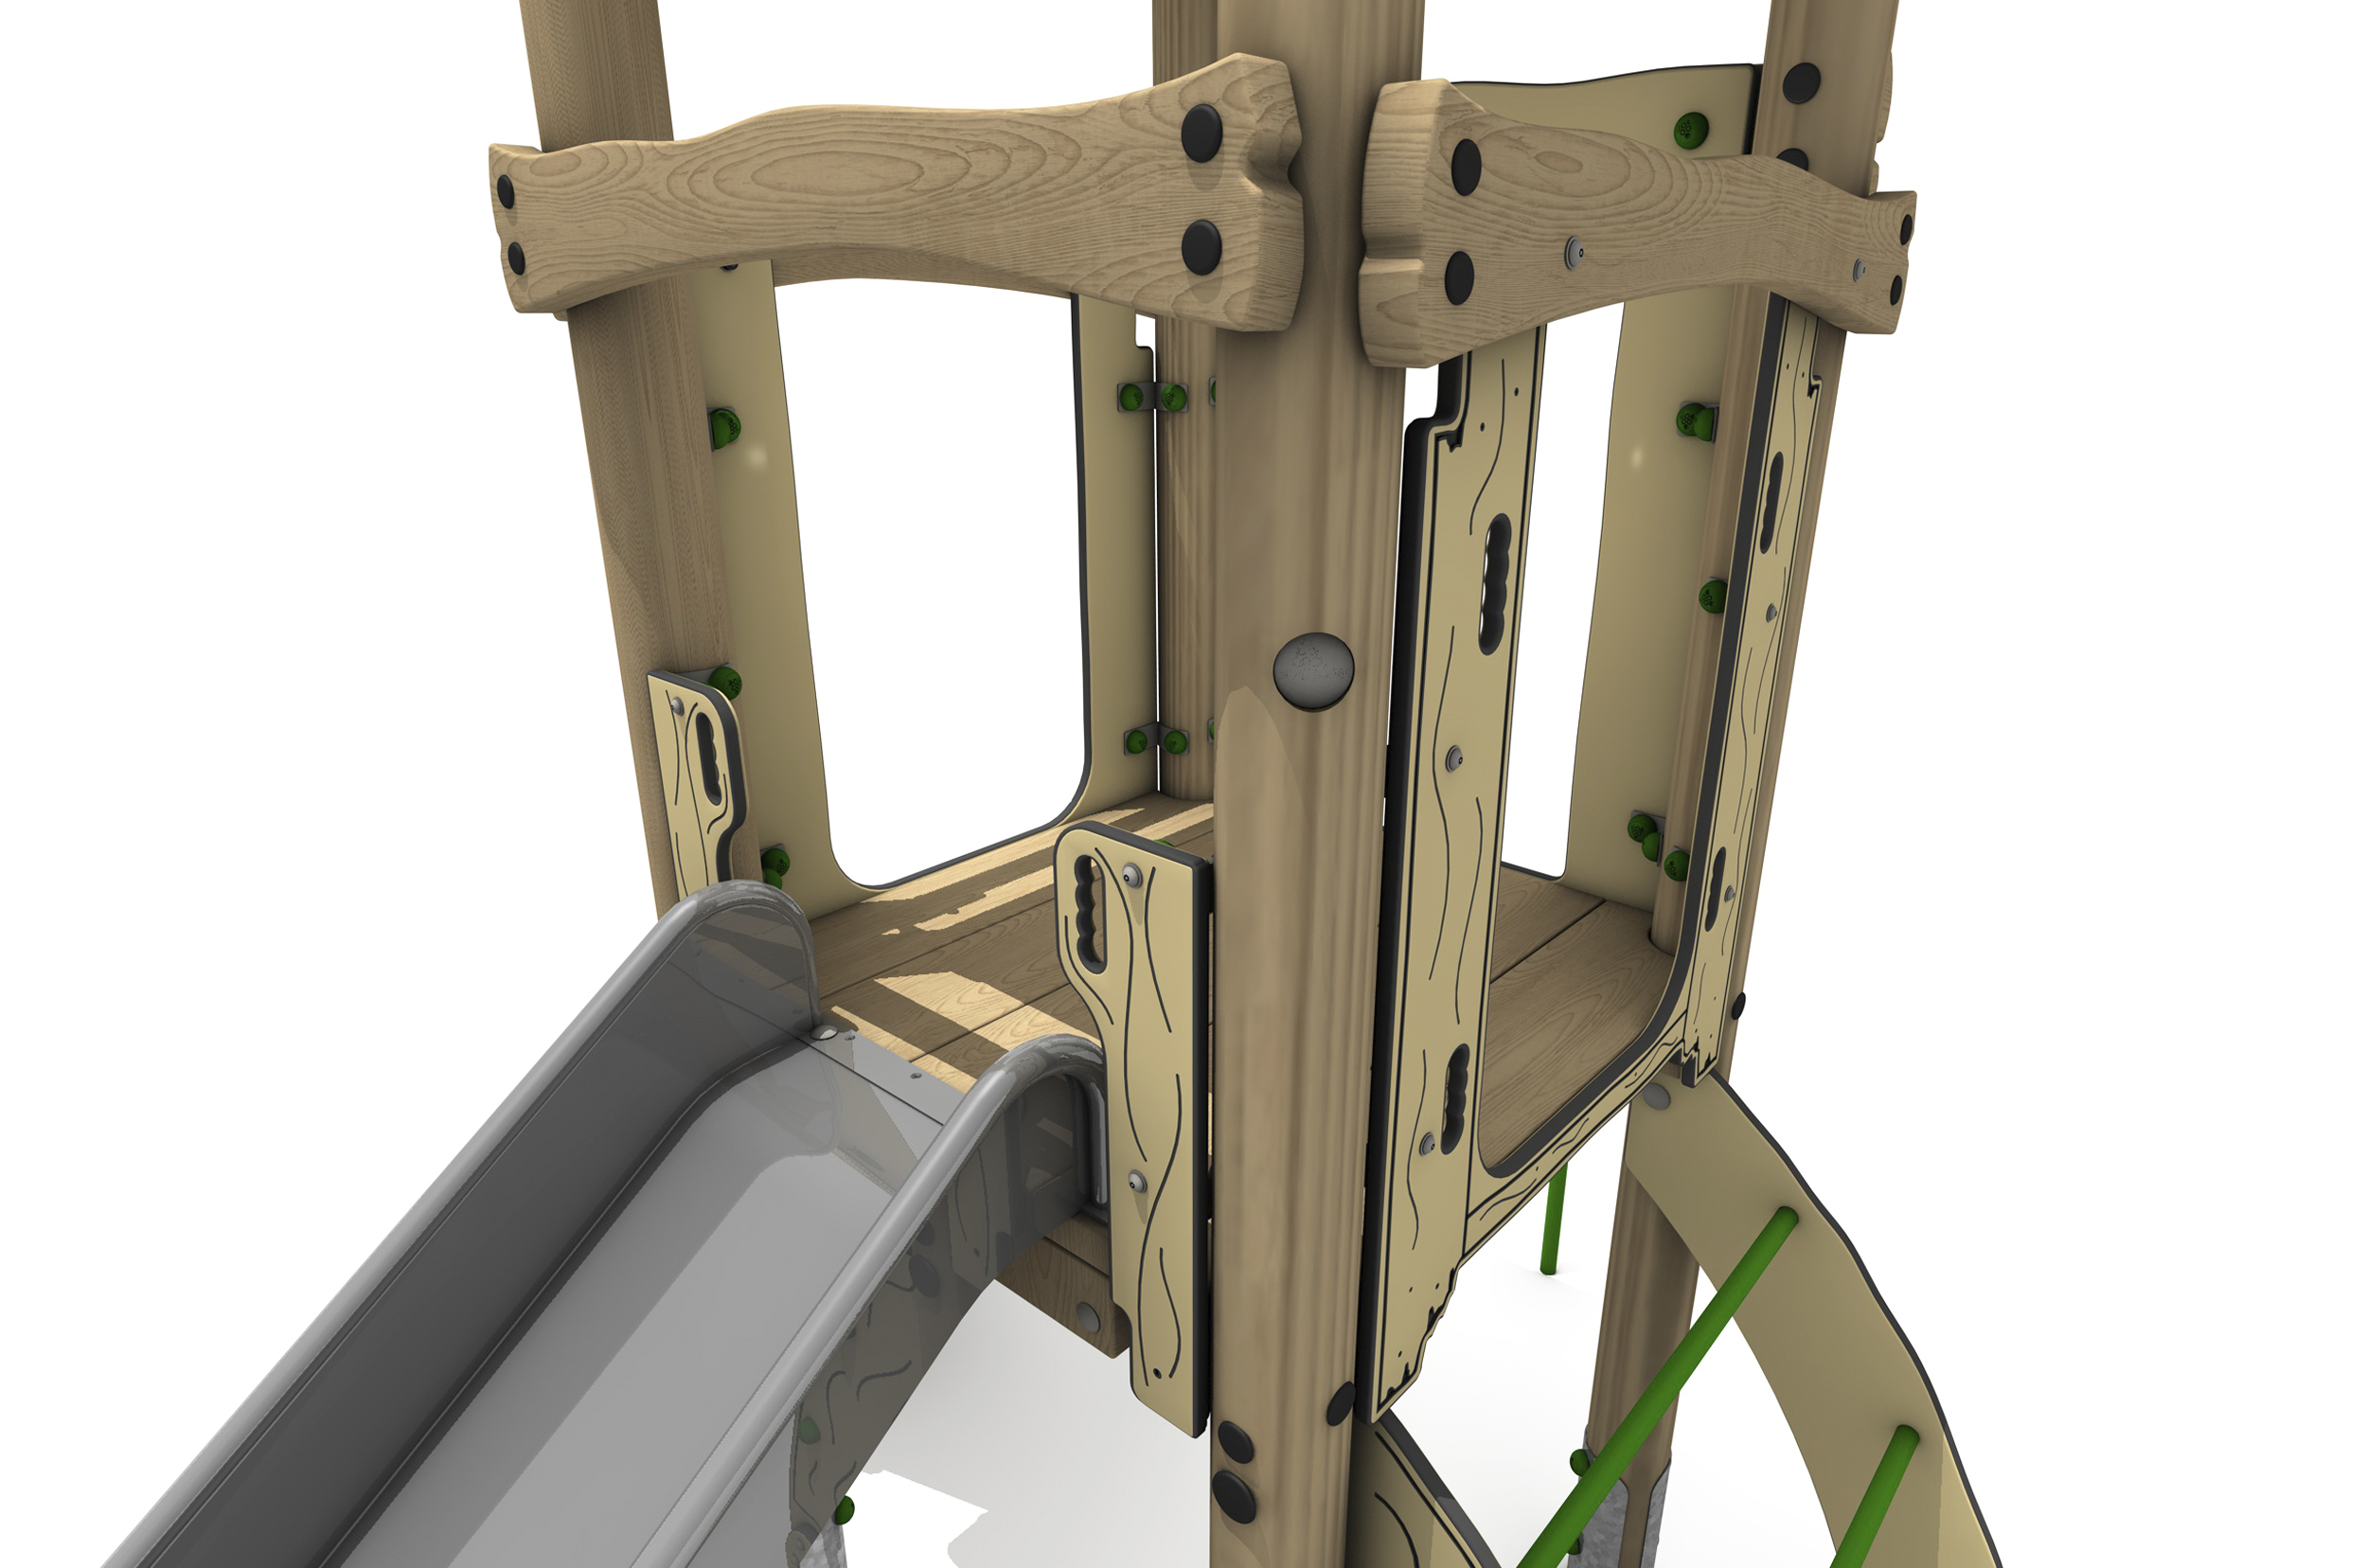 Timber Tower Single Deck 03, A timber tower climber platform where children access the steel slide. the platform is accessed from the arched green rung ladder on the right side.